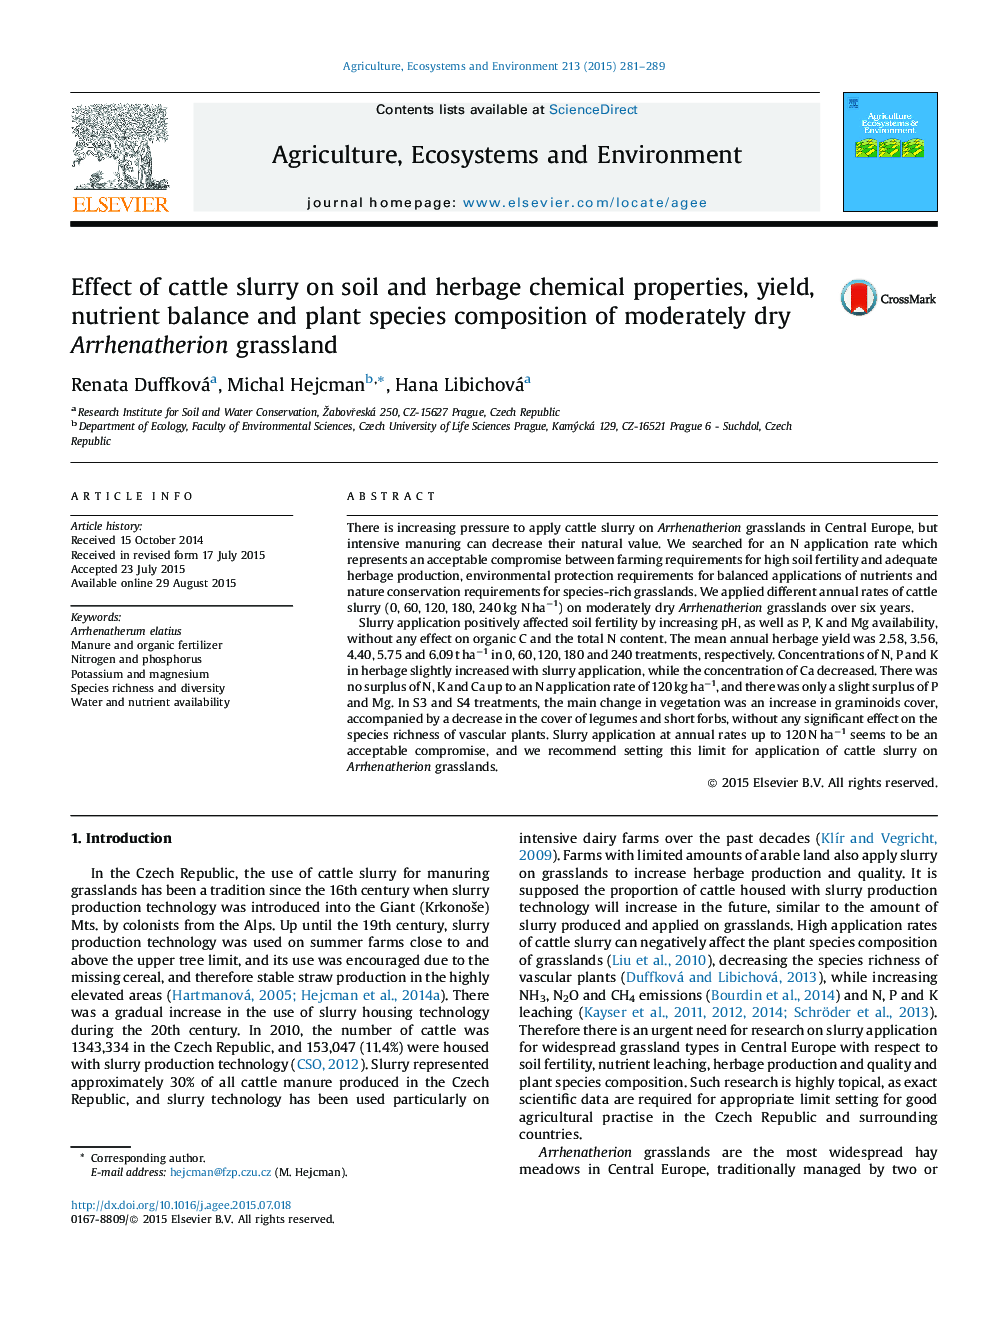 Effect of cattle slurry on soil and herbage chemical properties, yield, nutrient balance and plant species composition of moderately dry Arrhenatherion grassland